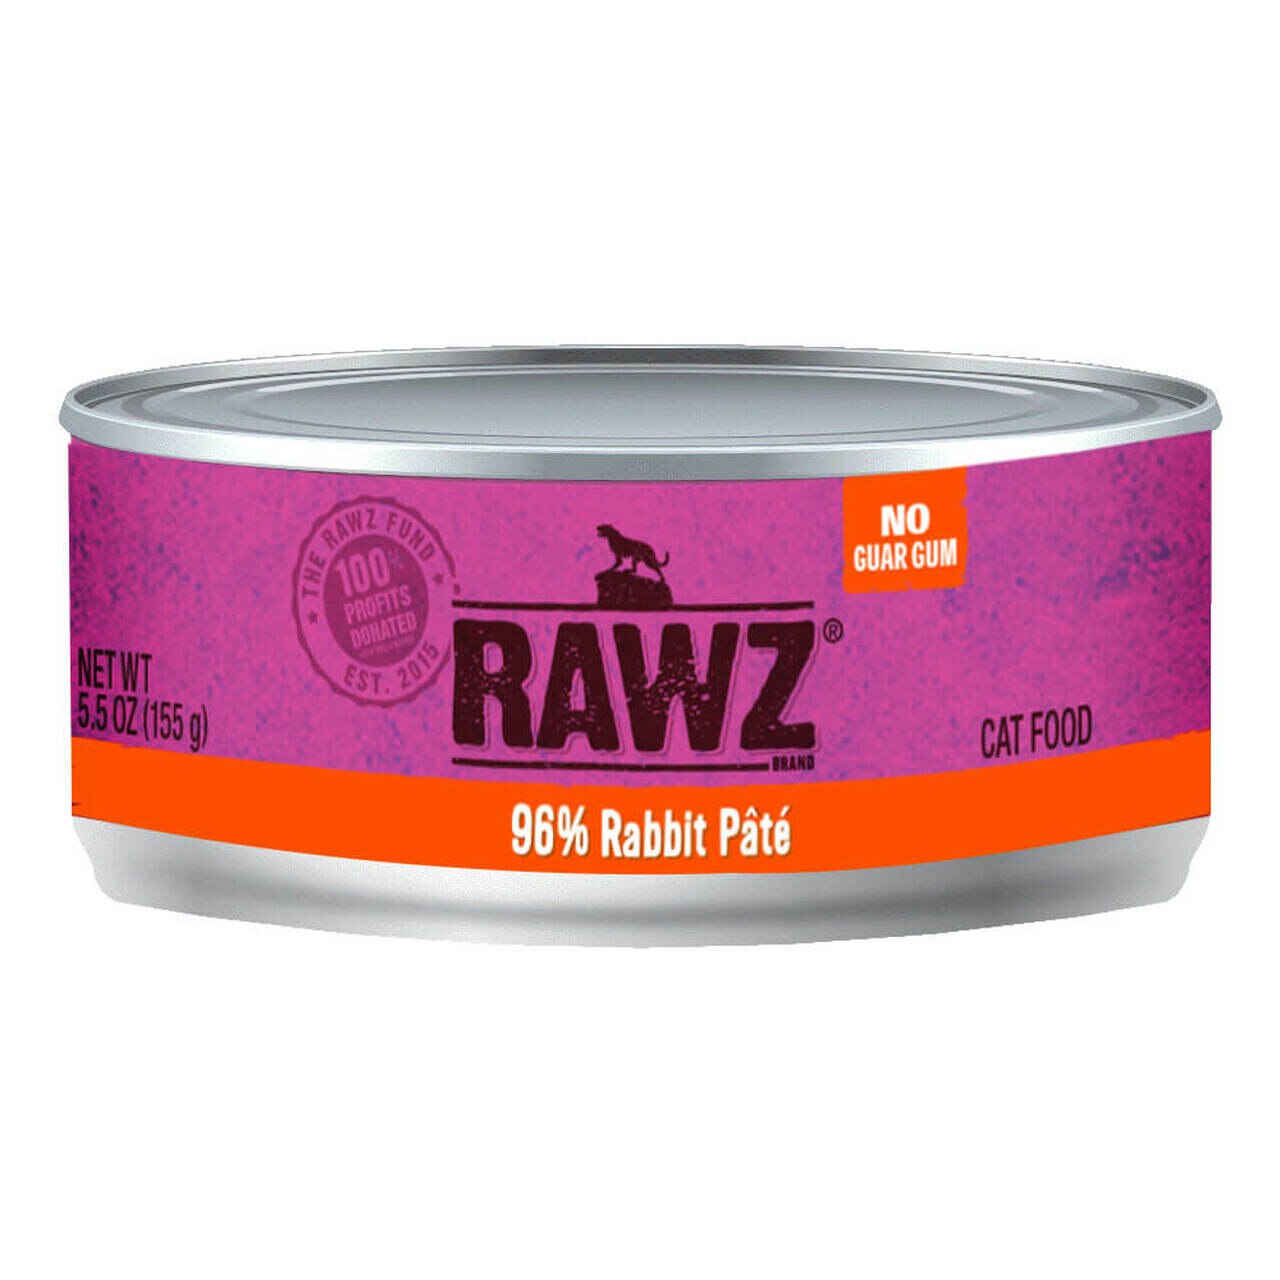 RAWZ 96% Rabbit Pate Canned Cat Food 24-Pack 5.5oz - Click Image to Close